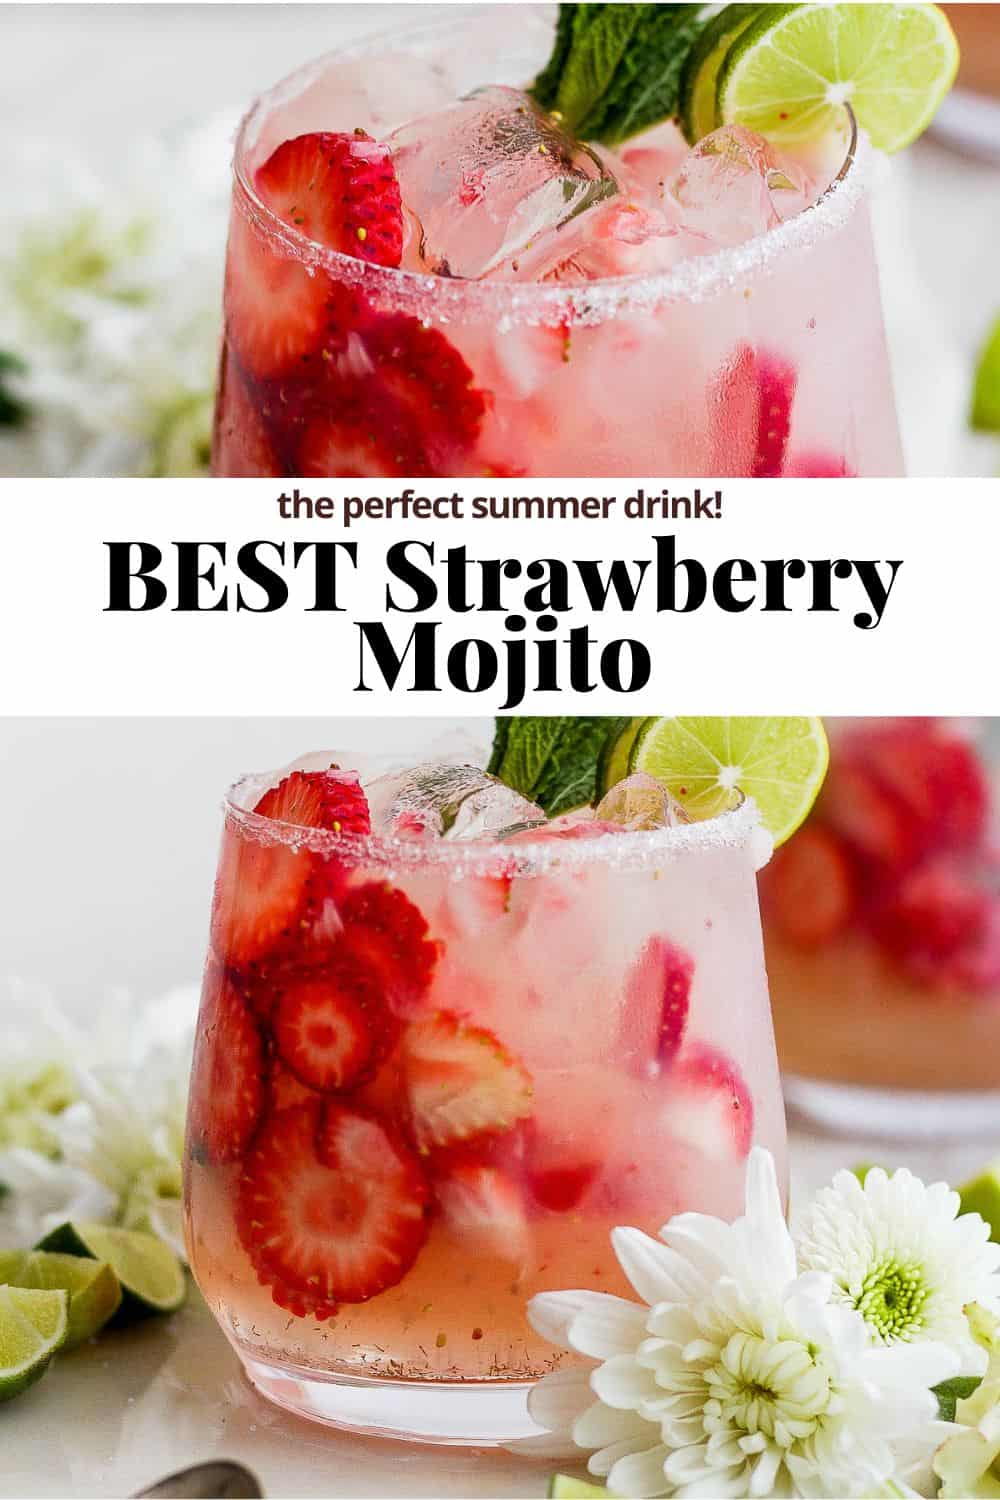 Pinterest image showing the strawberry mojito in a glass with the title "the perfect summer drink! Best Strawberry Mojito".